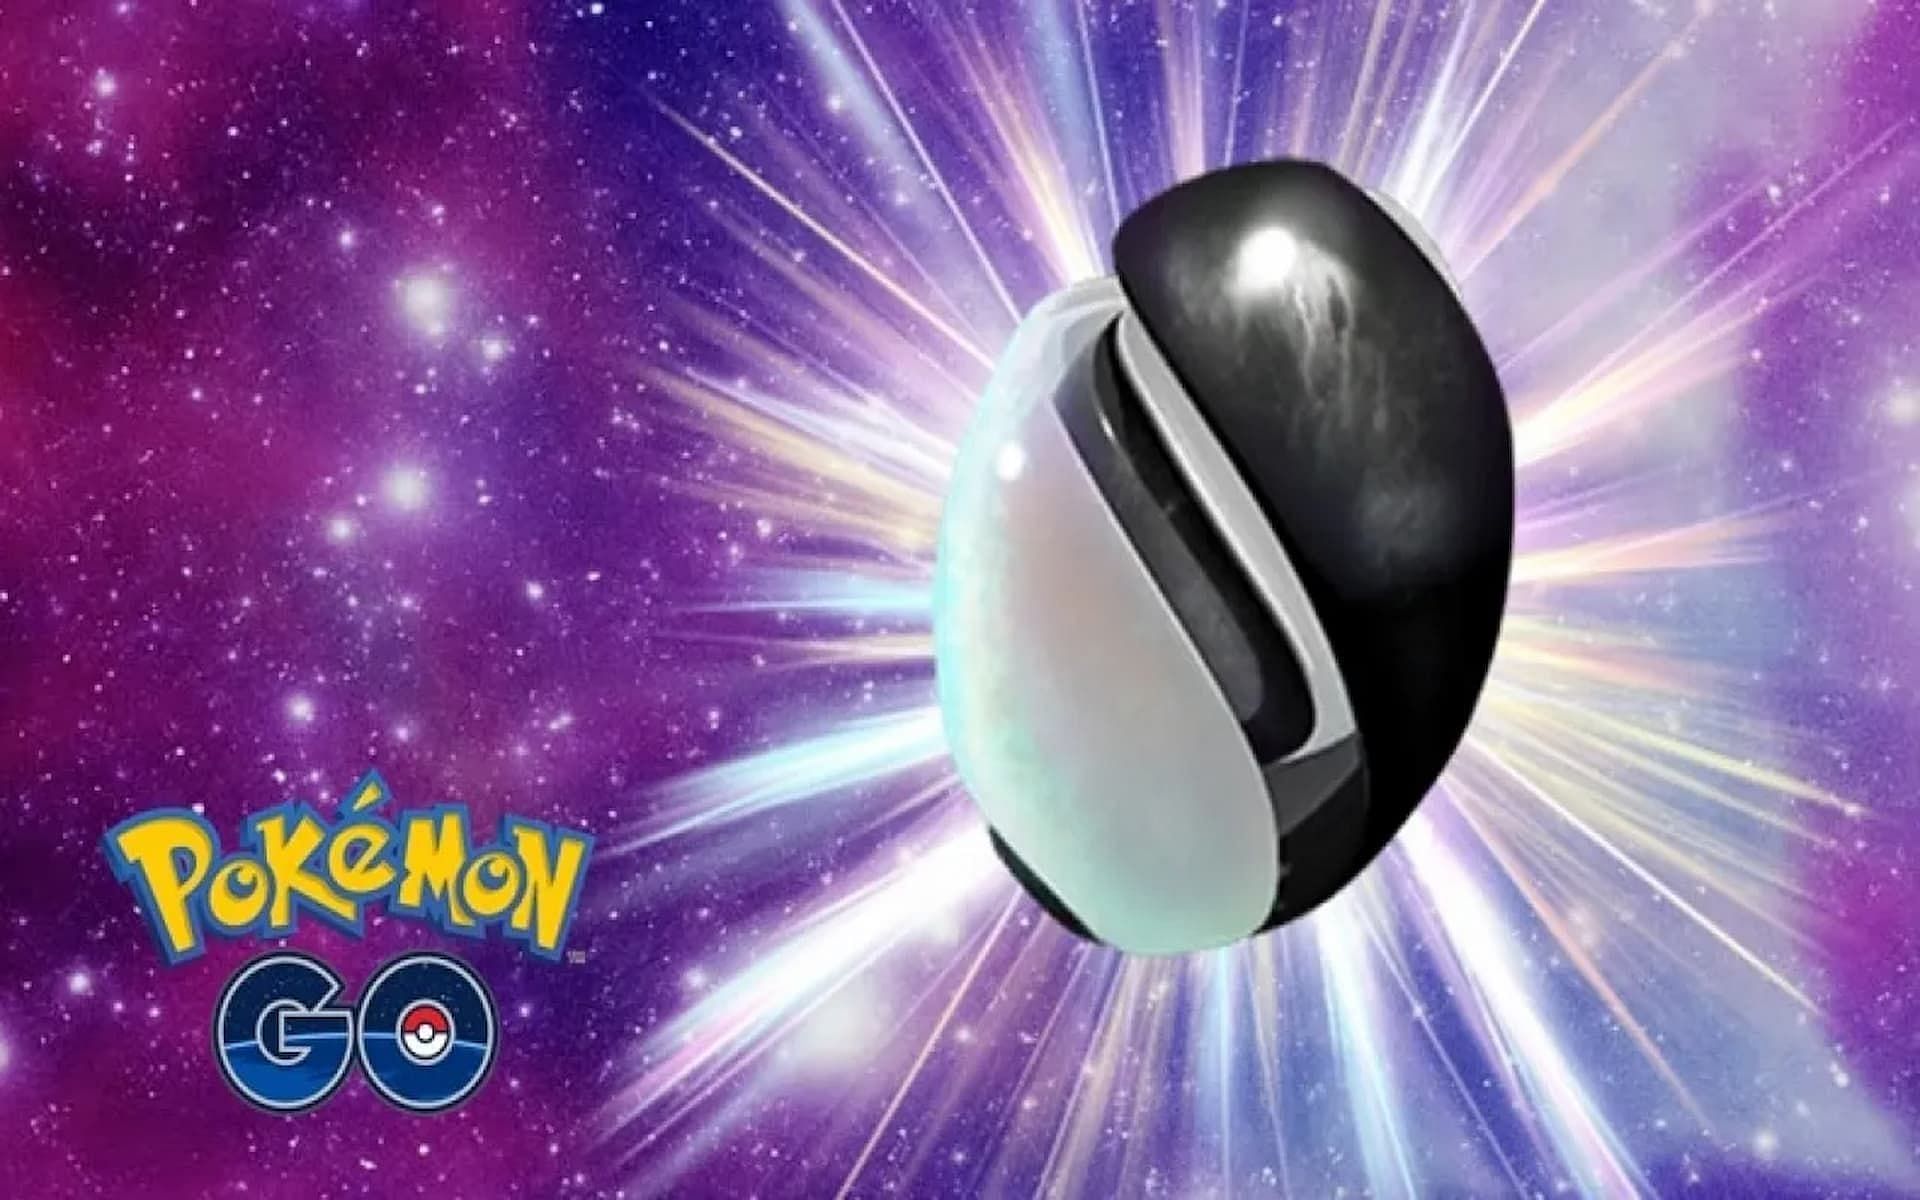 The Unova Stone is just one of many items players can obtain in Pokemon GO (Image via Niantic)